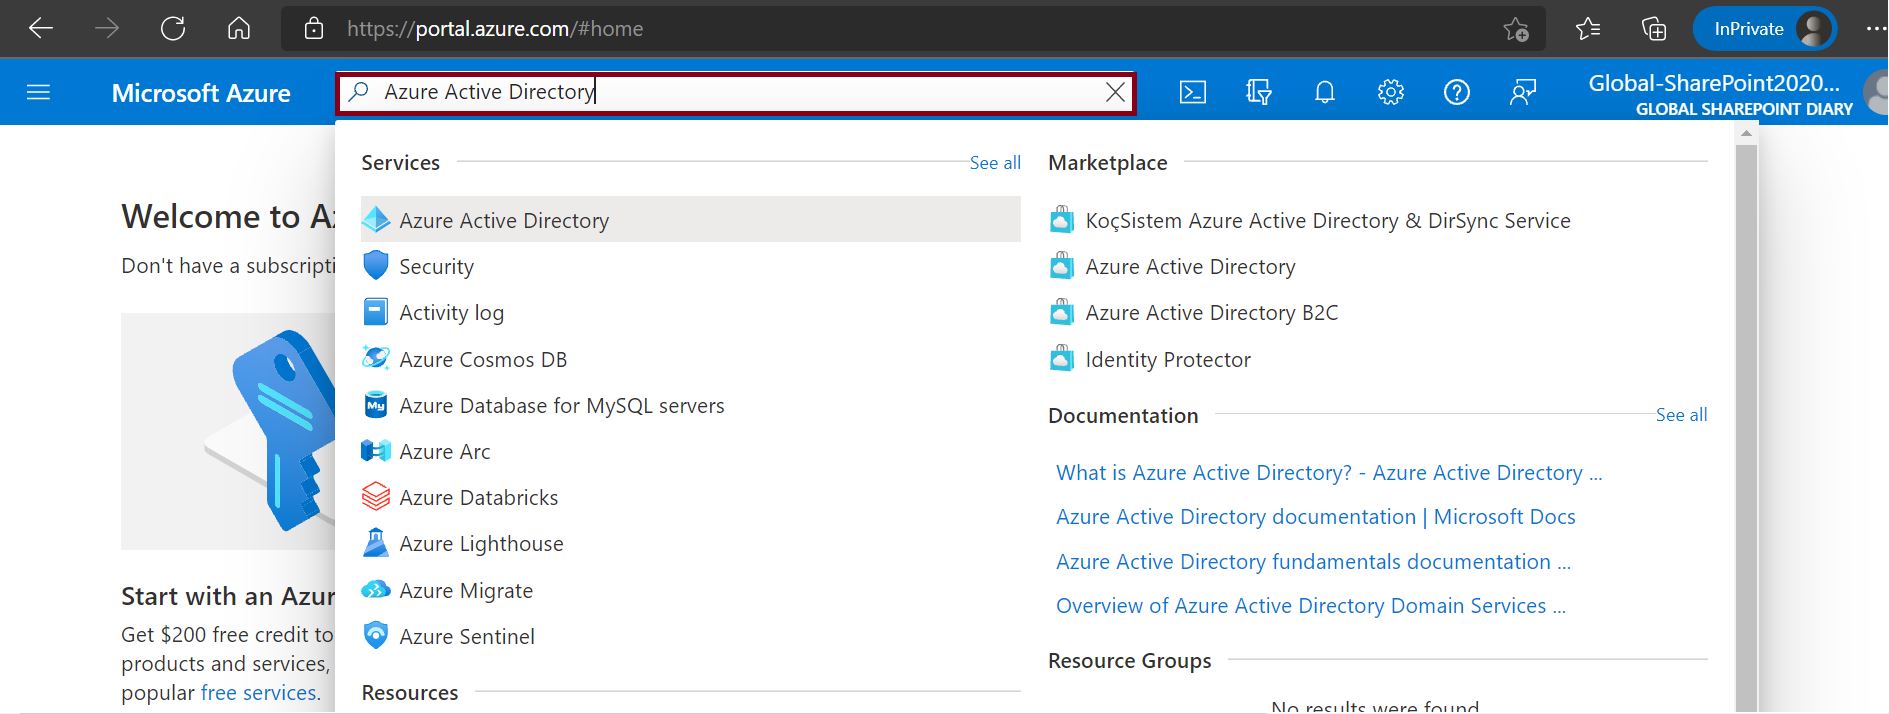 Azure Active Directory in Office 365